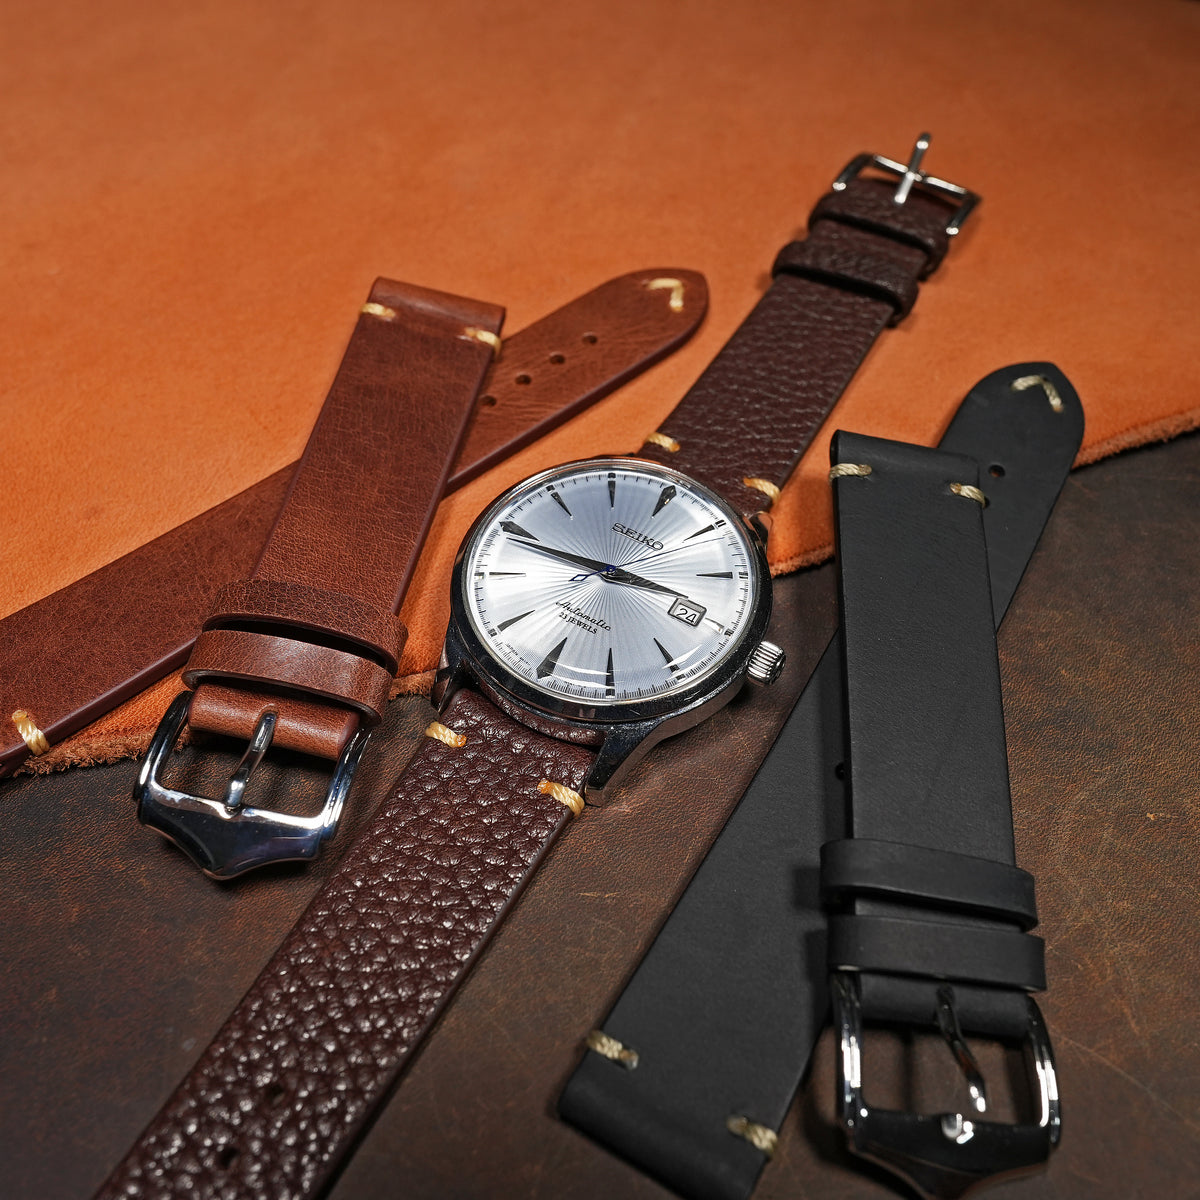 Premium Vintage Calf Leather Watch Strap in Distressed Brown - Nomad Watch Works MY